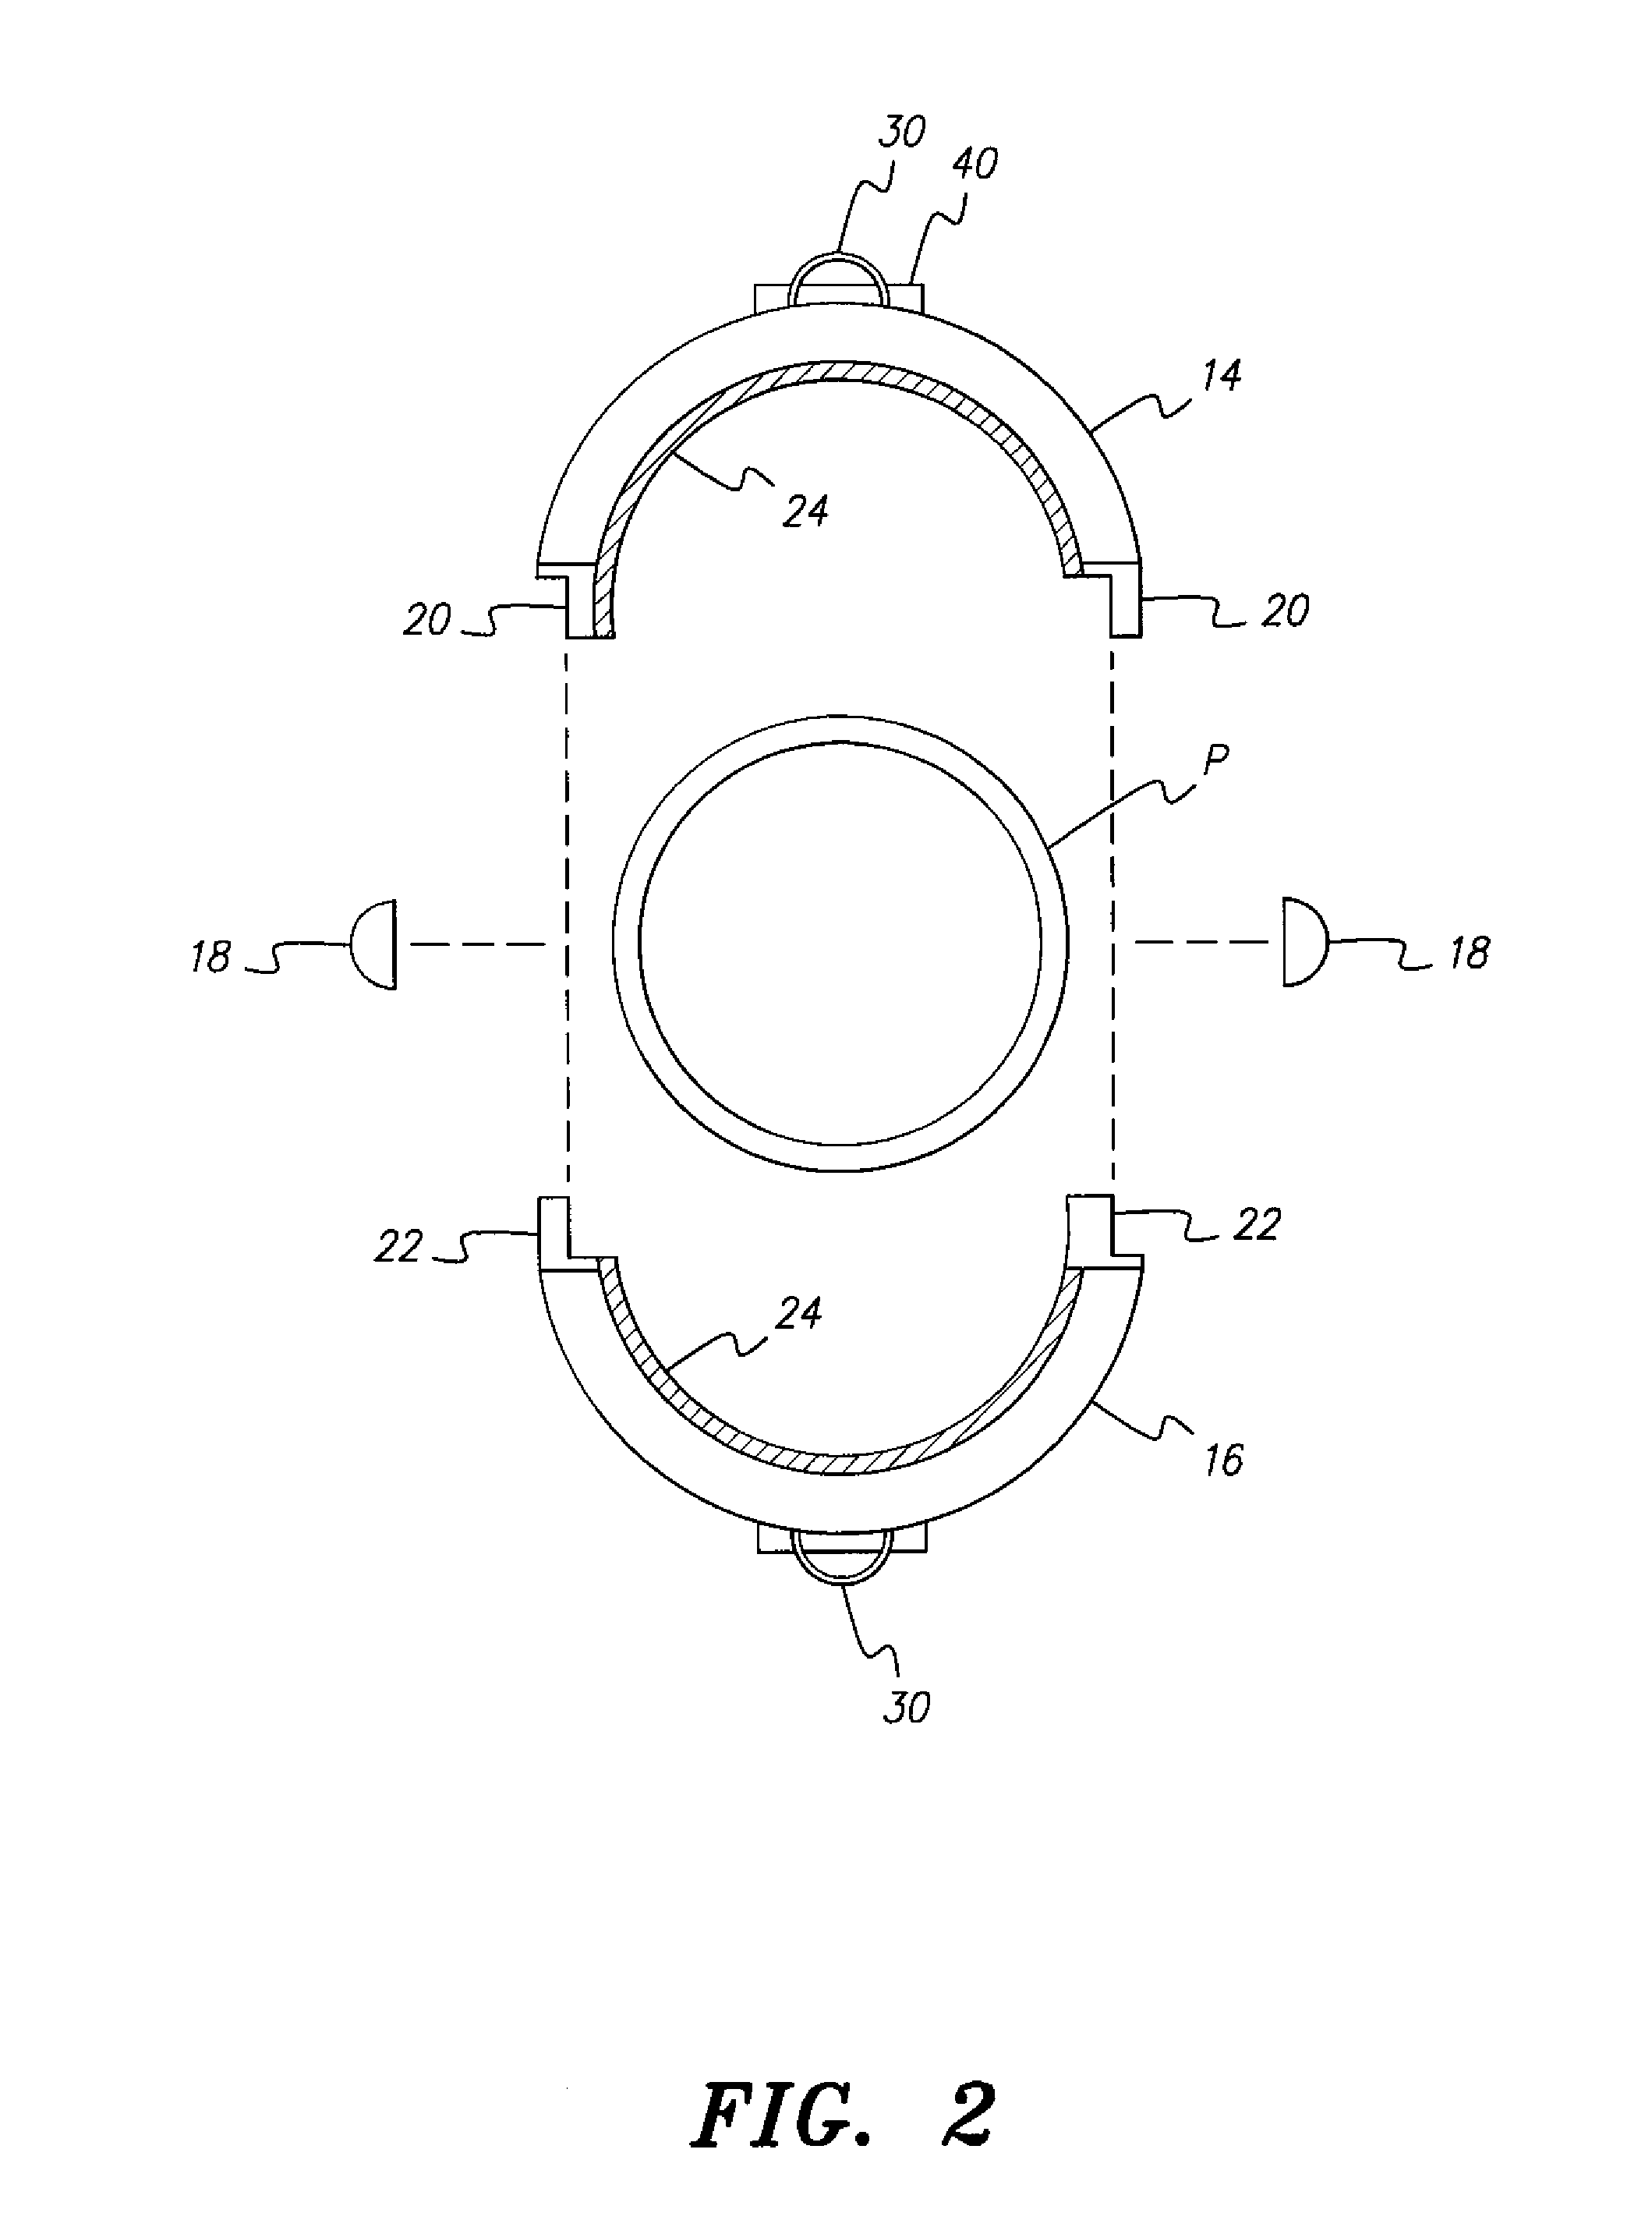 Acoustic leak detection system and method with enviromental noise isolation